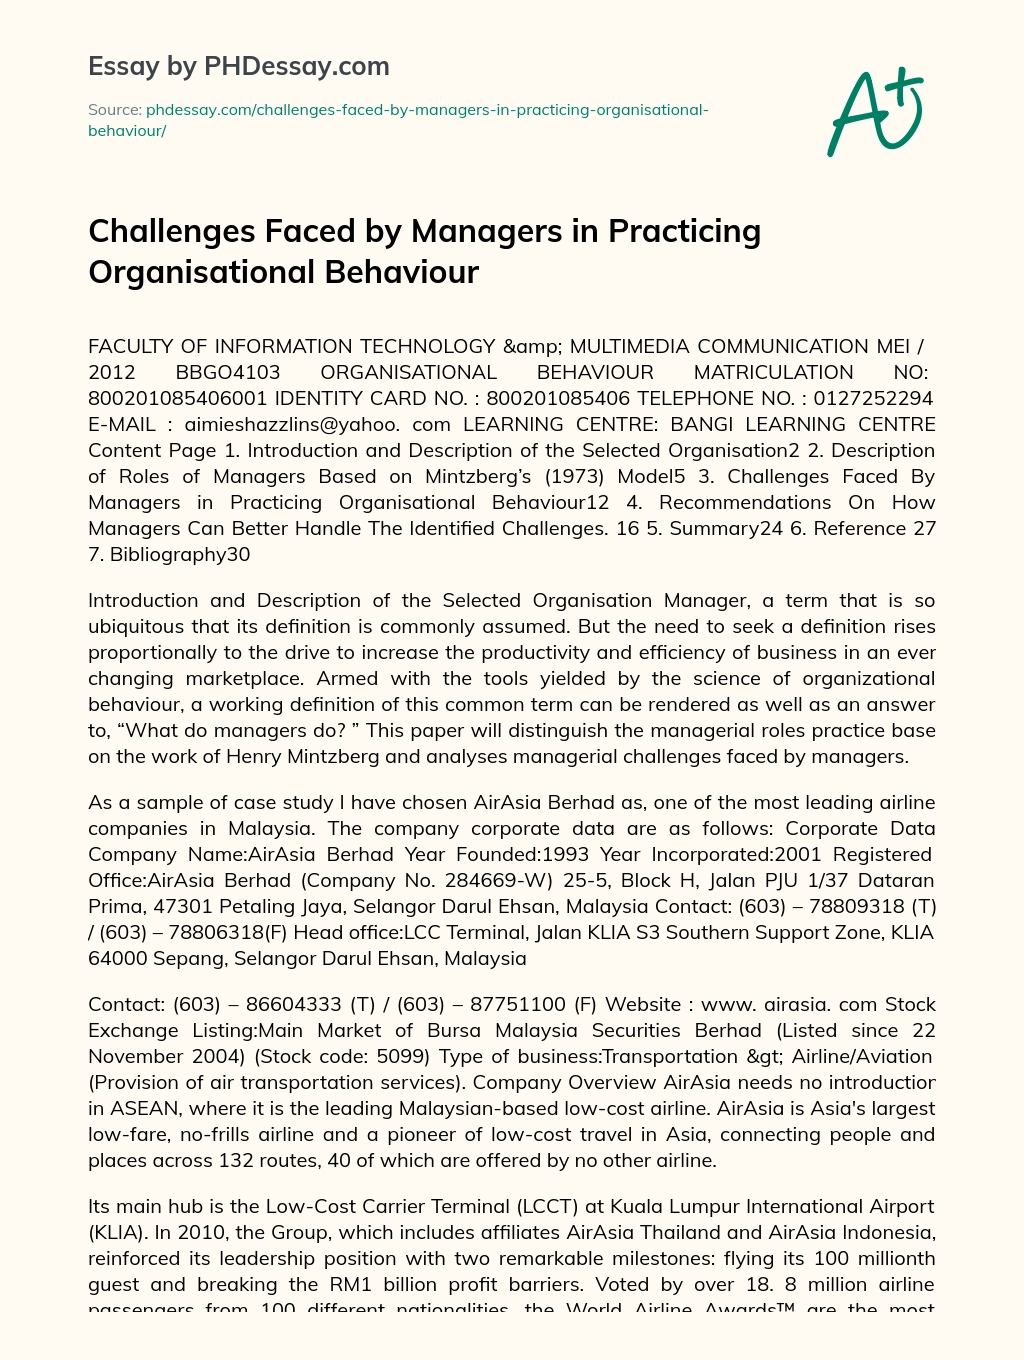 Challenges faced by managers in practicing organisational behaviour essay